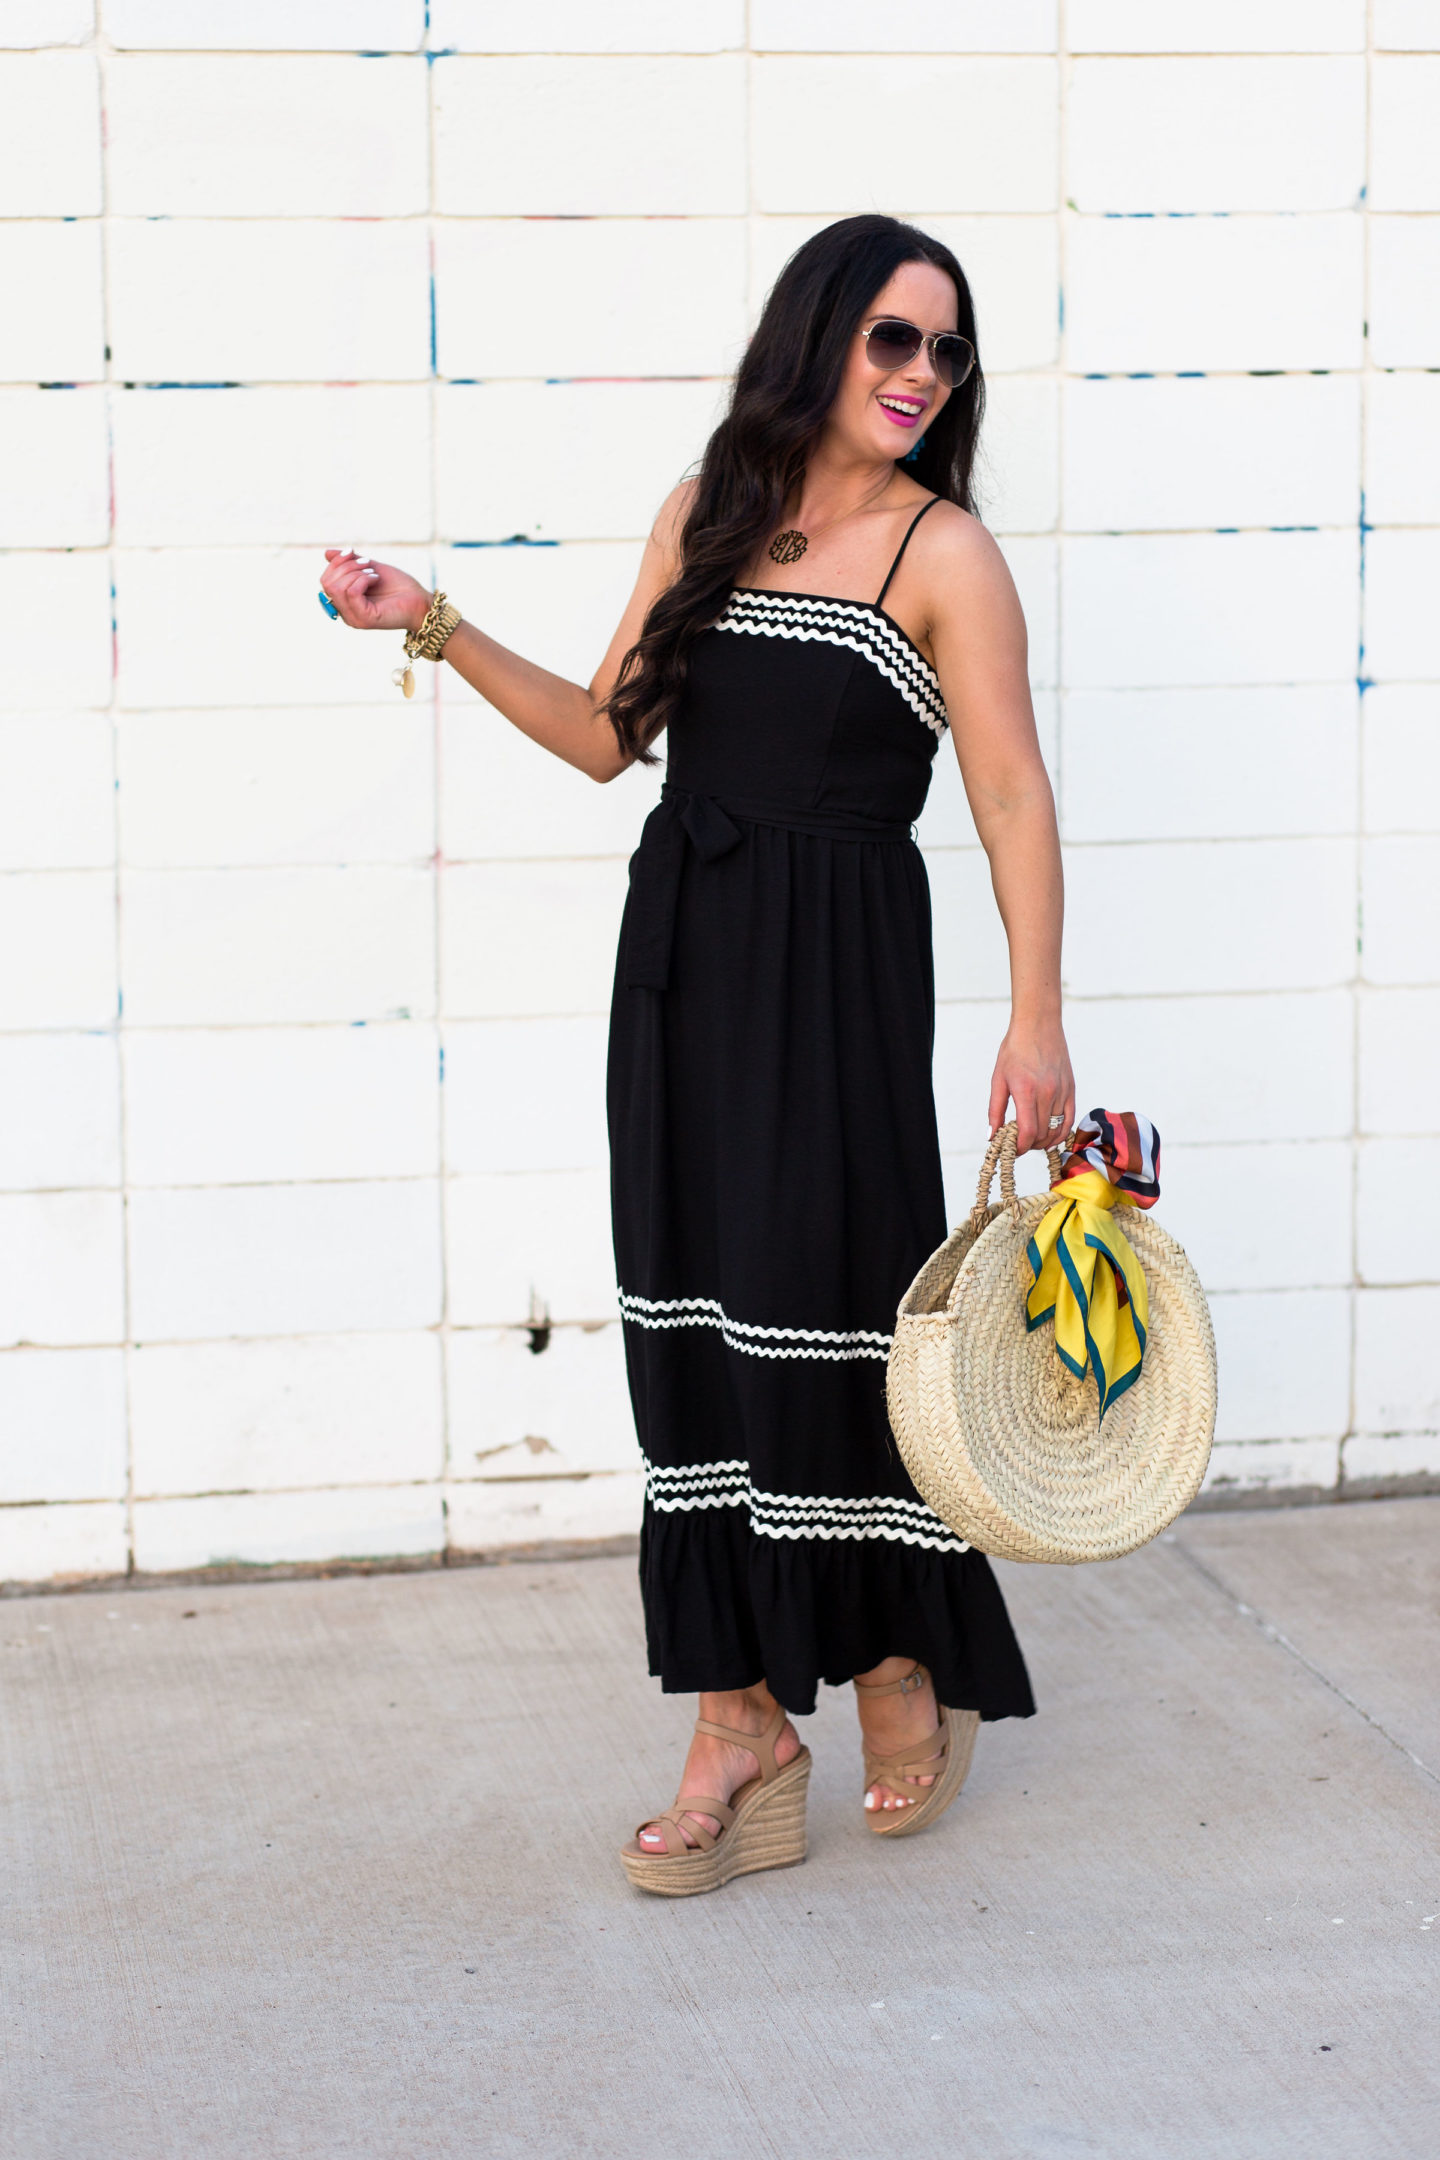 Tropical Maxi Dresses + Soleil Airbrush Tan Giveaway! - The Double Take ...